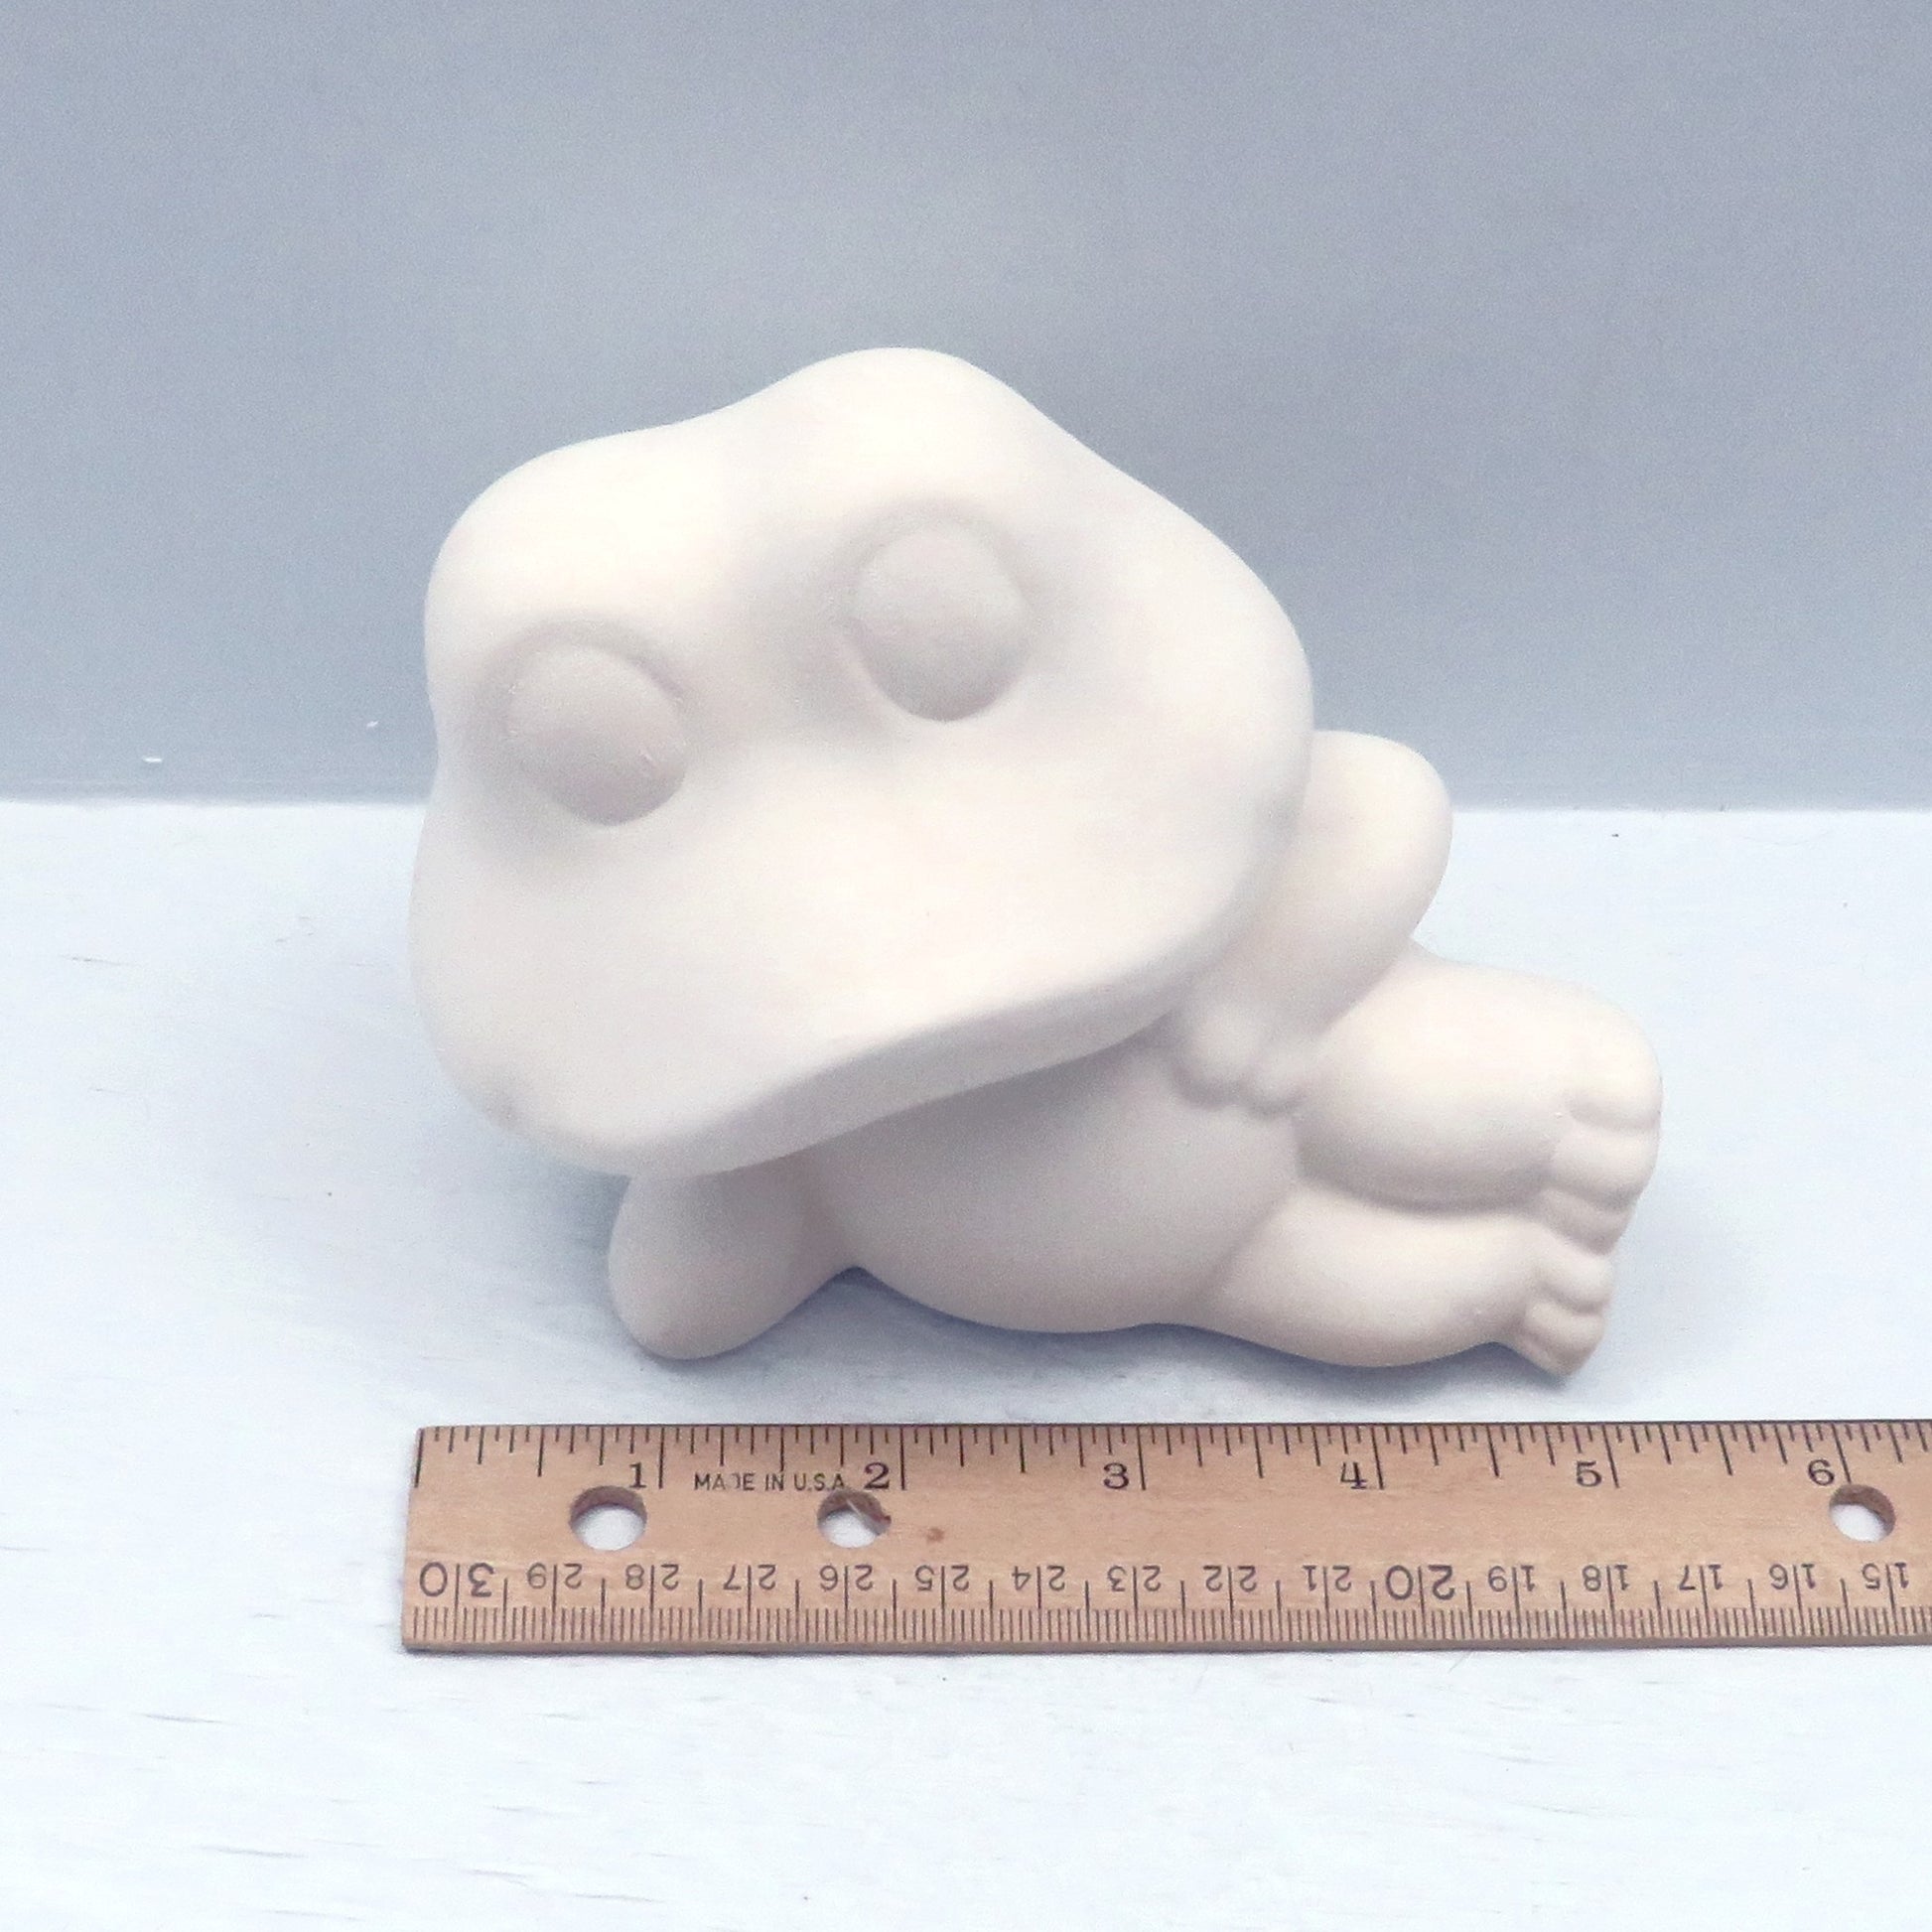 handmade paintable frog statue lying on side near a ruler showing it to be approximately 5 inches long.